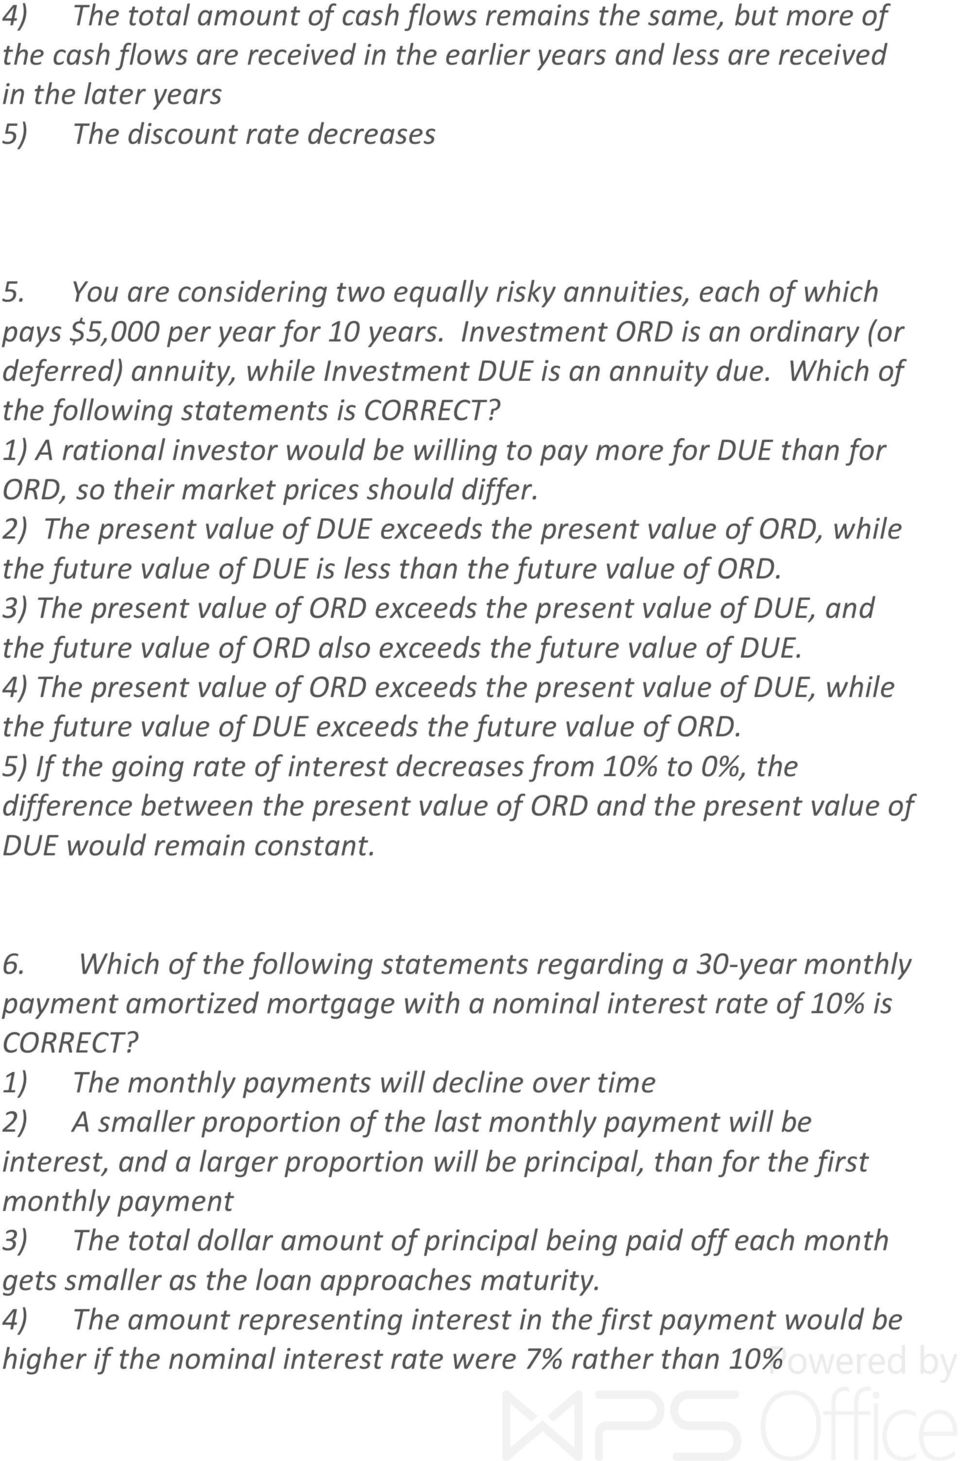 Which of the following statements is CORRECT? 1) A rational investor would be willing to pay more for DUE than for ORD, so their market prices should differ.